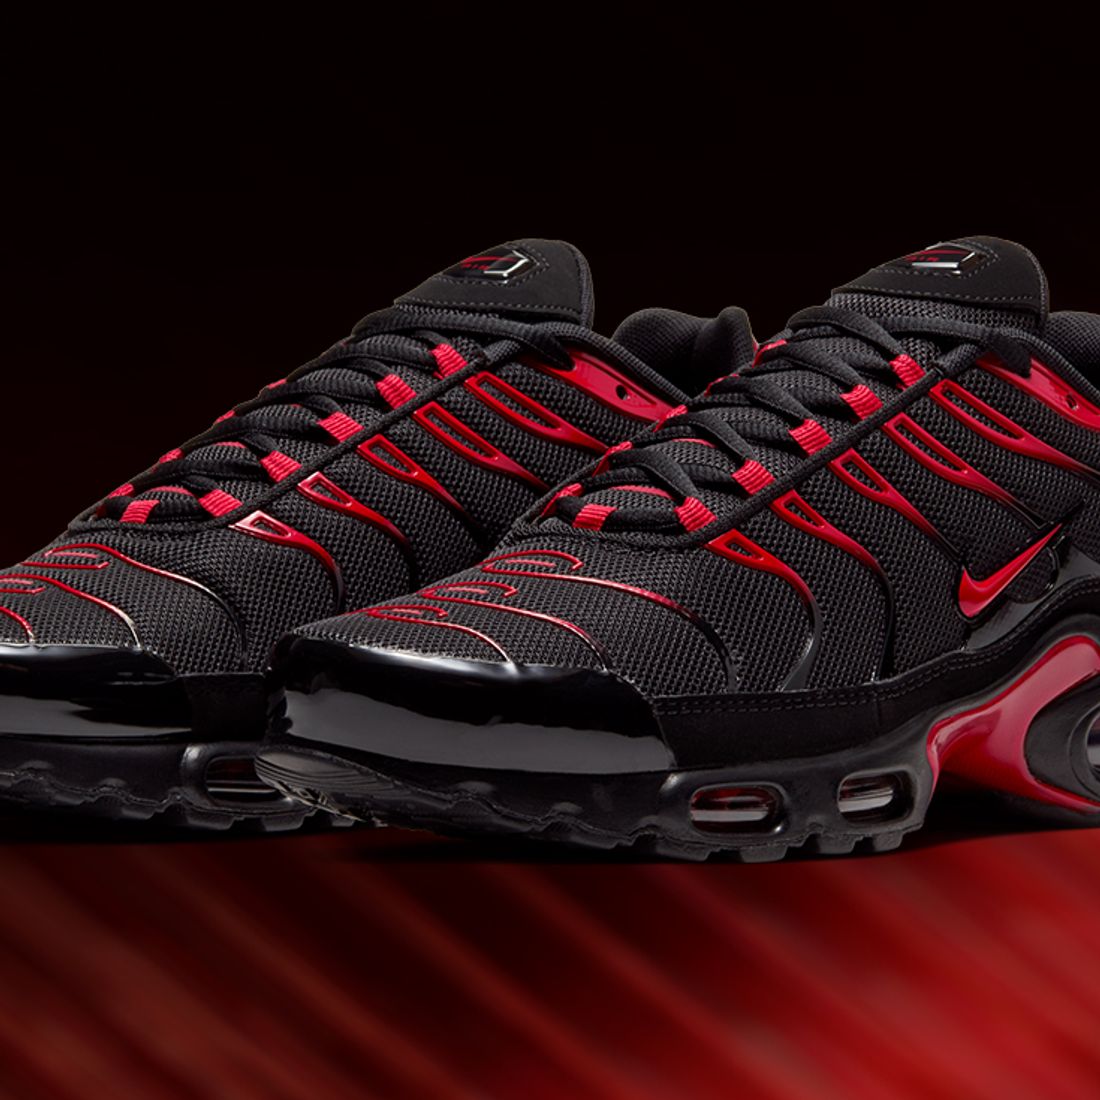 embotellamiento Correctamente espiritual Watch Your Step: The Nike Tuned 'Red Belly Black' is Back! - Sneaker Freaker